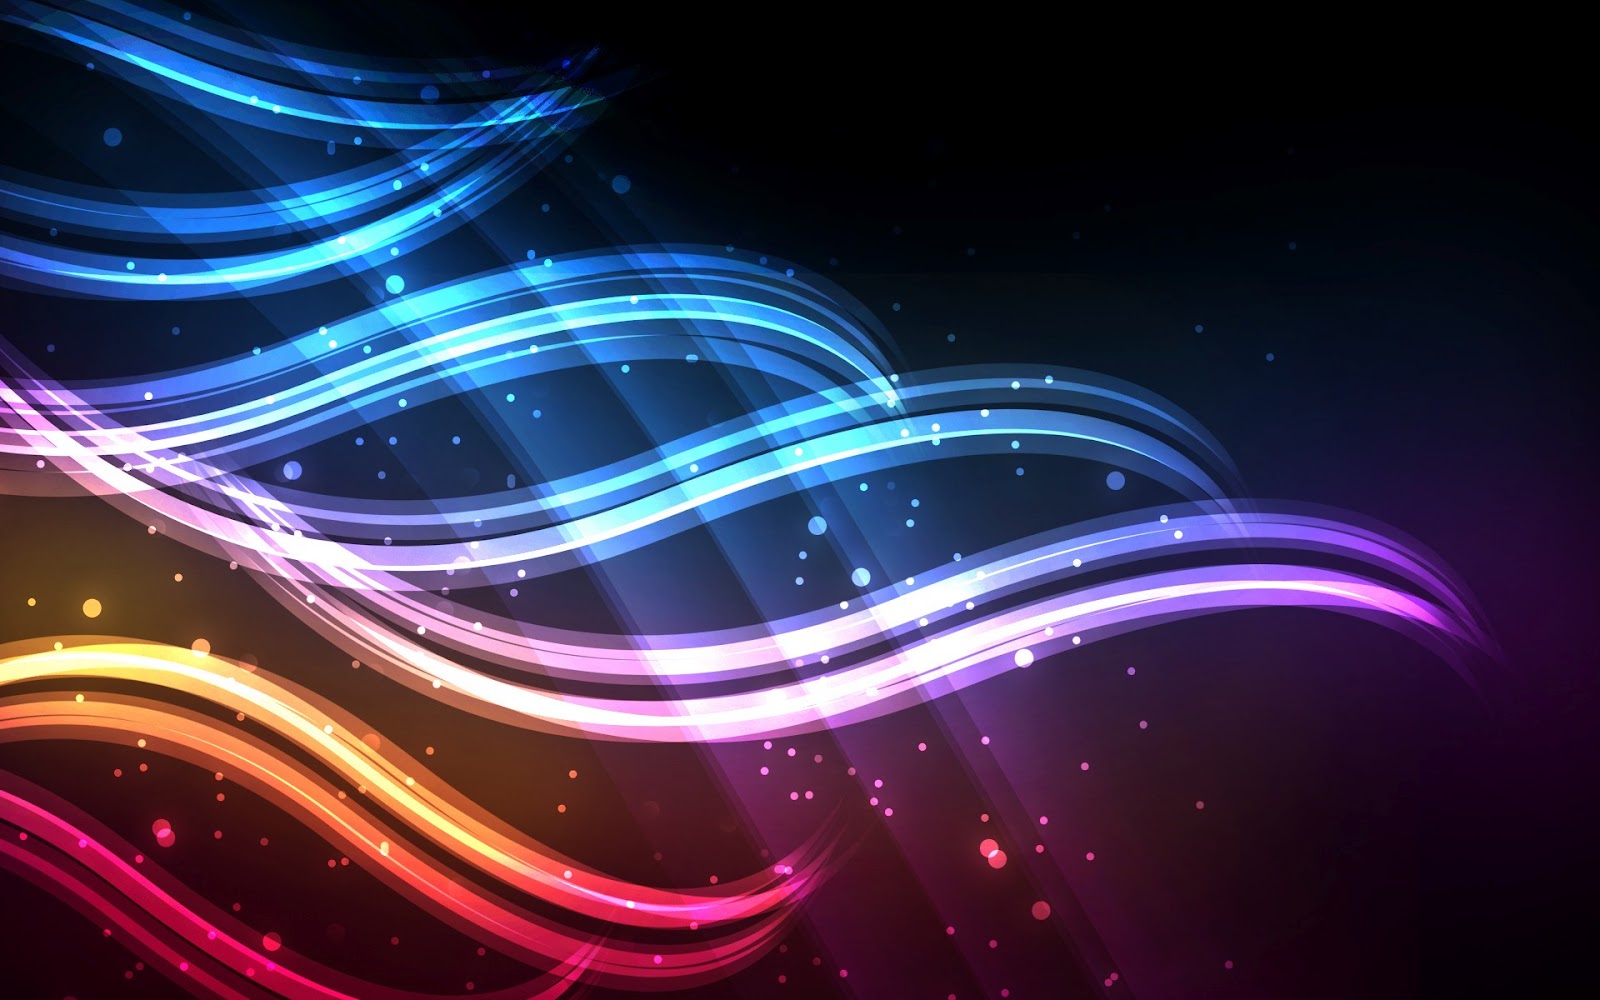 electrical engineering wallpapers hd,purple,blue,light,violet,graphic design